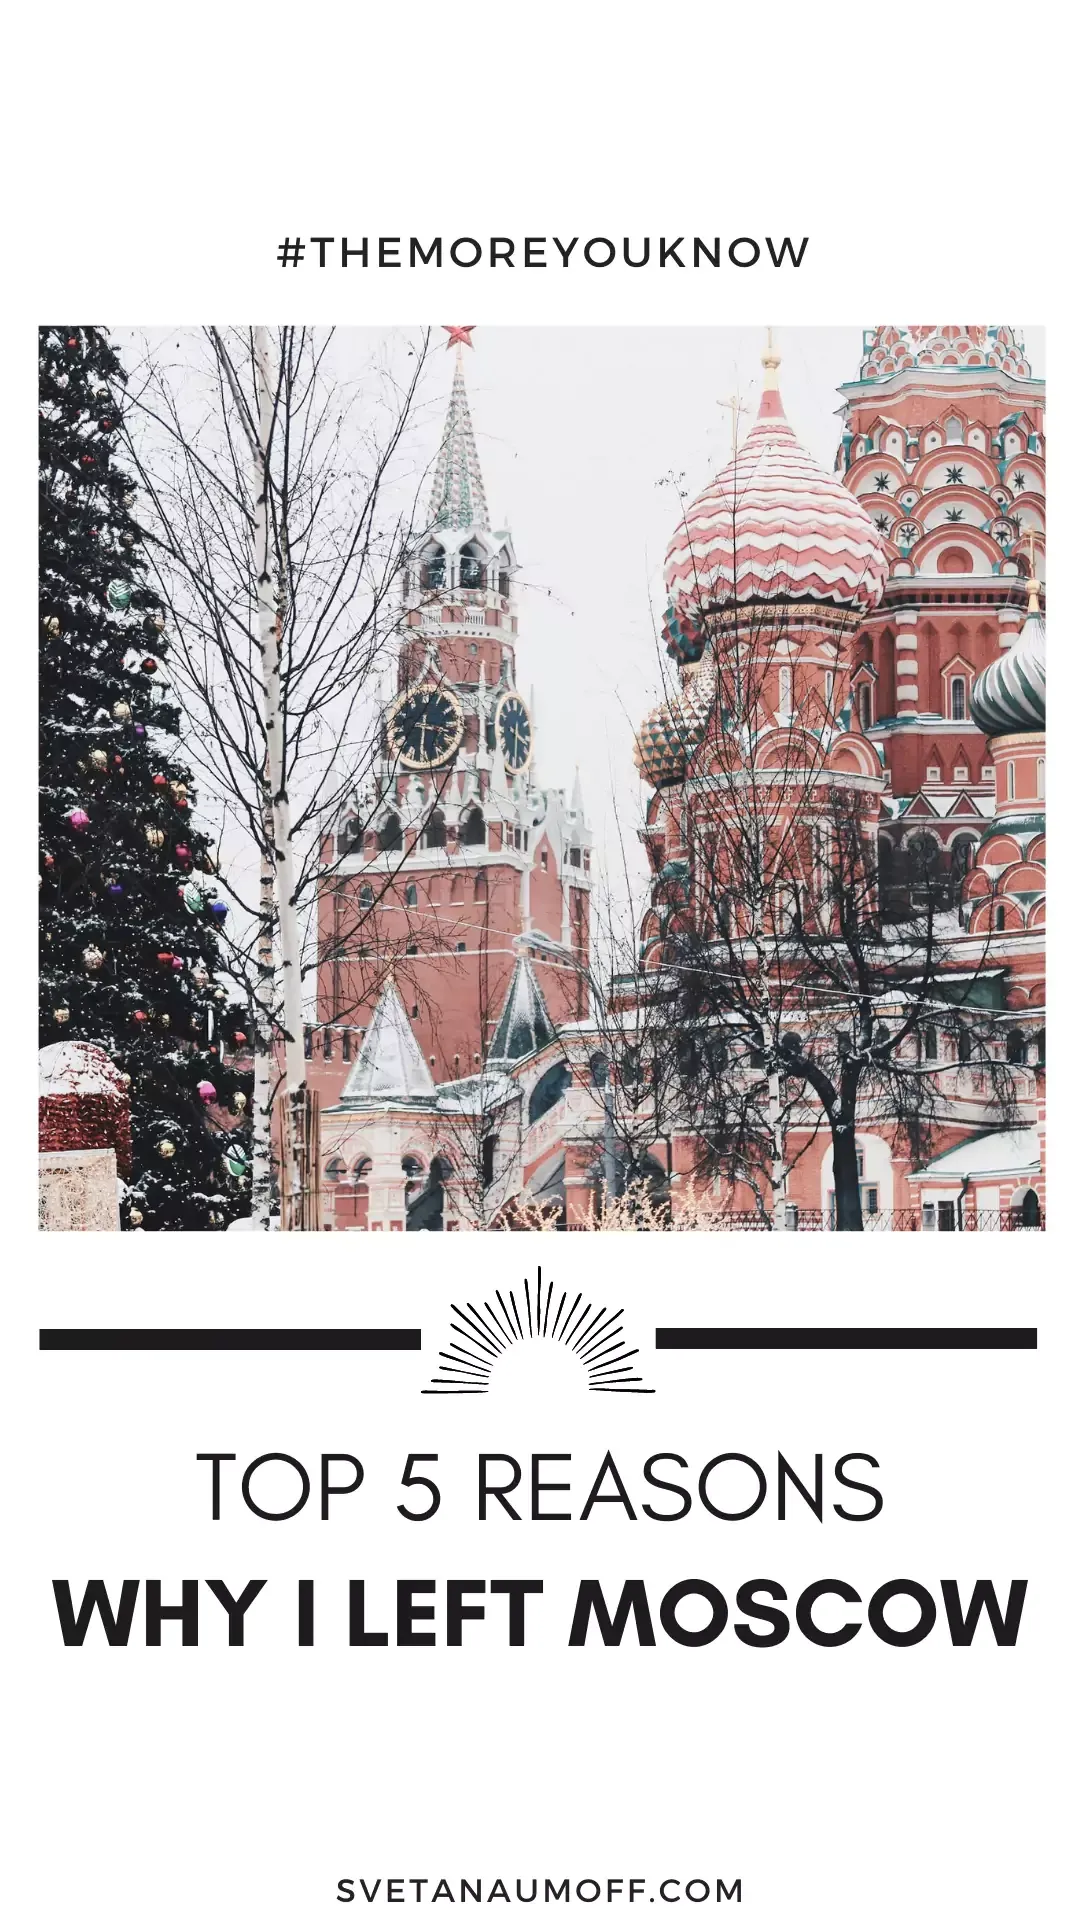 Top 5 Reasons Why I Left Moscow